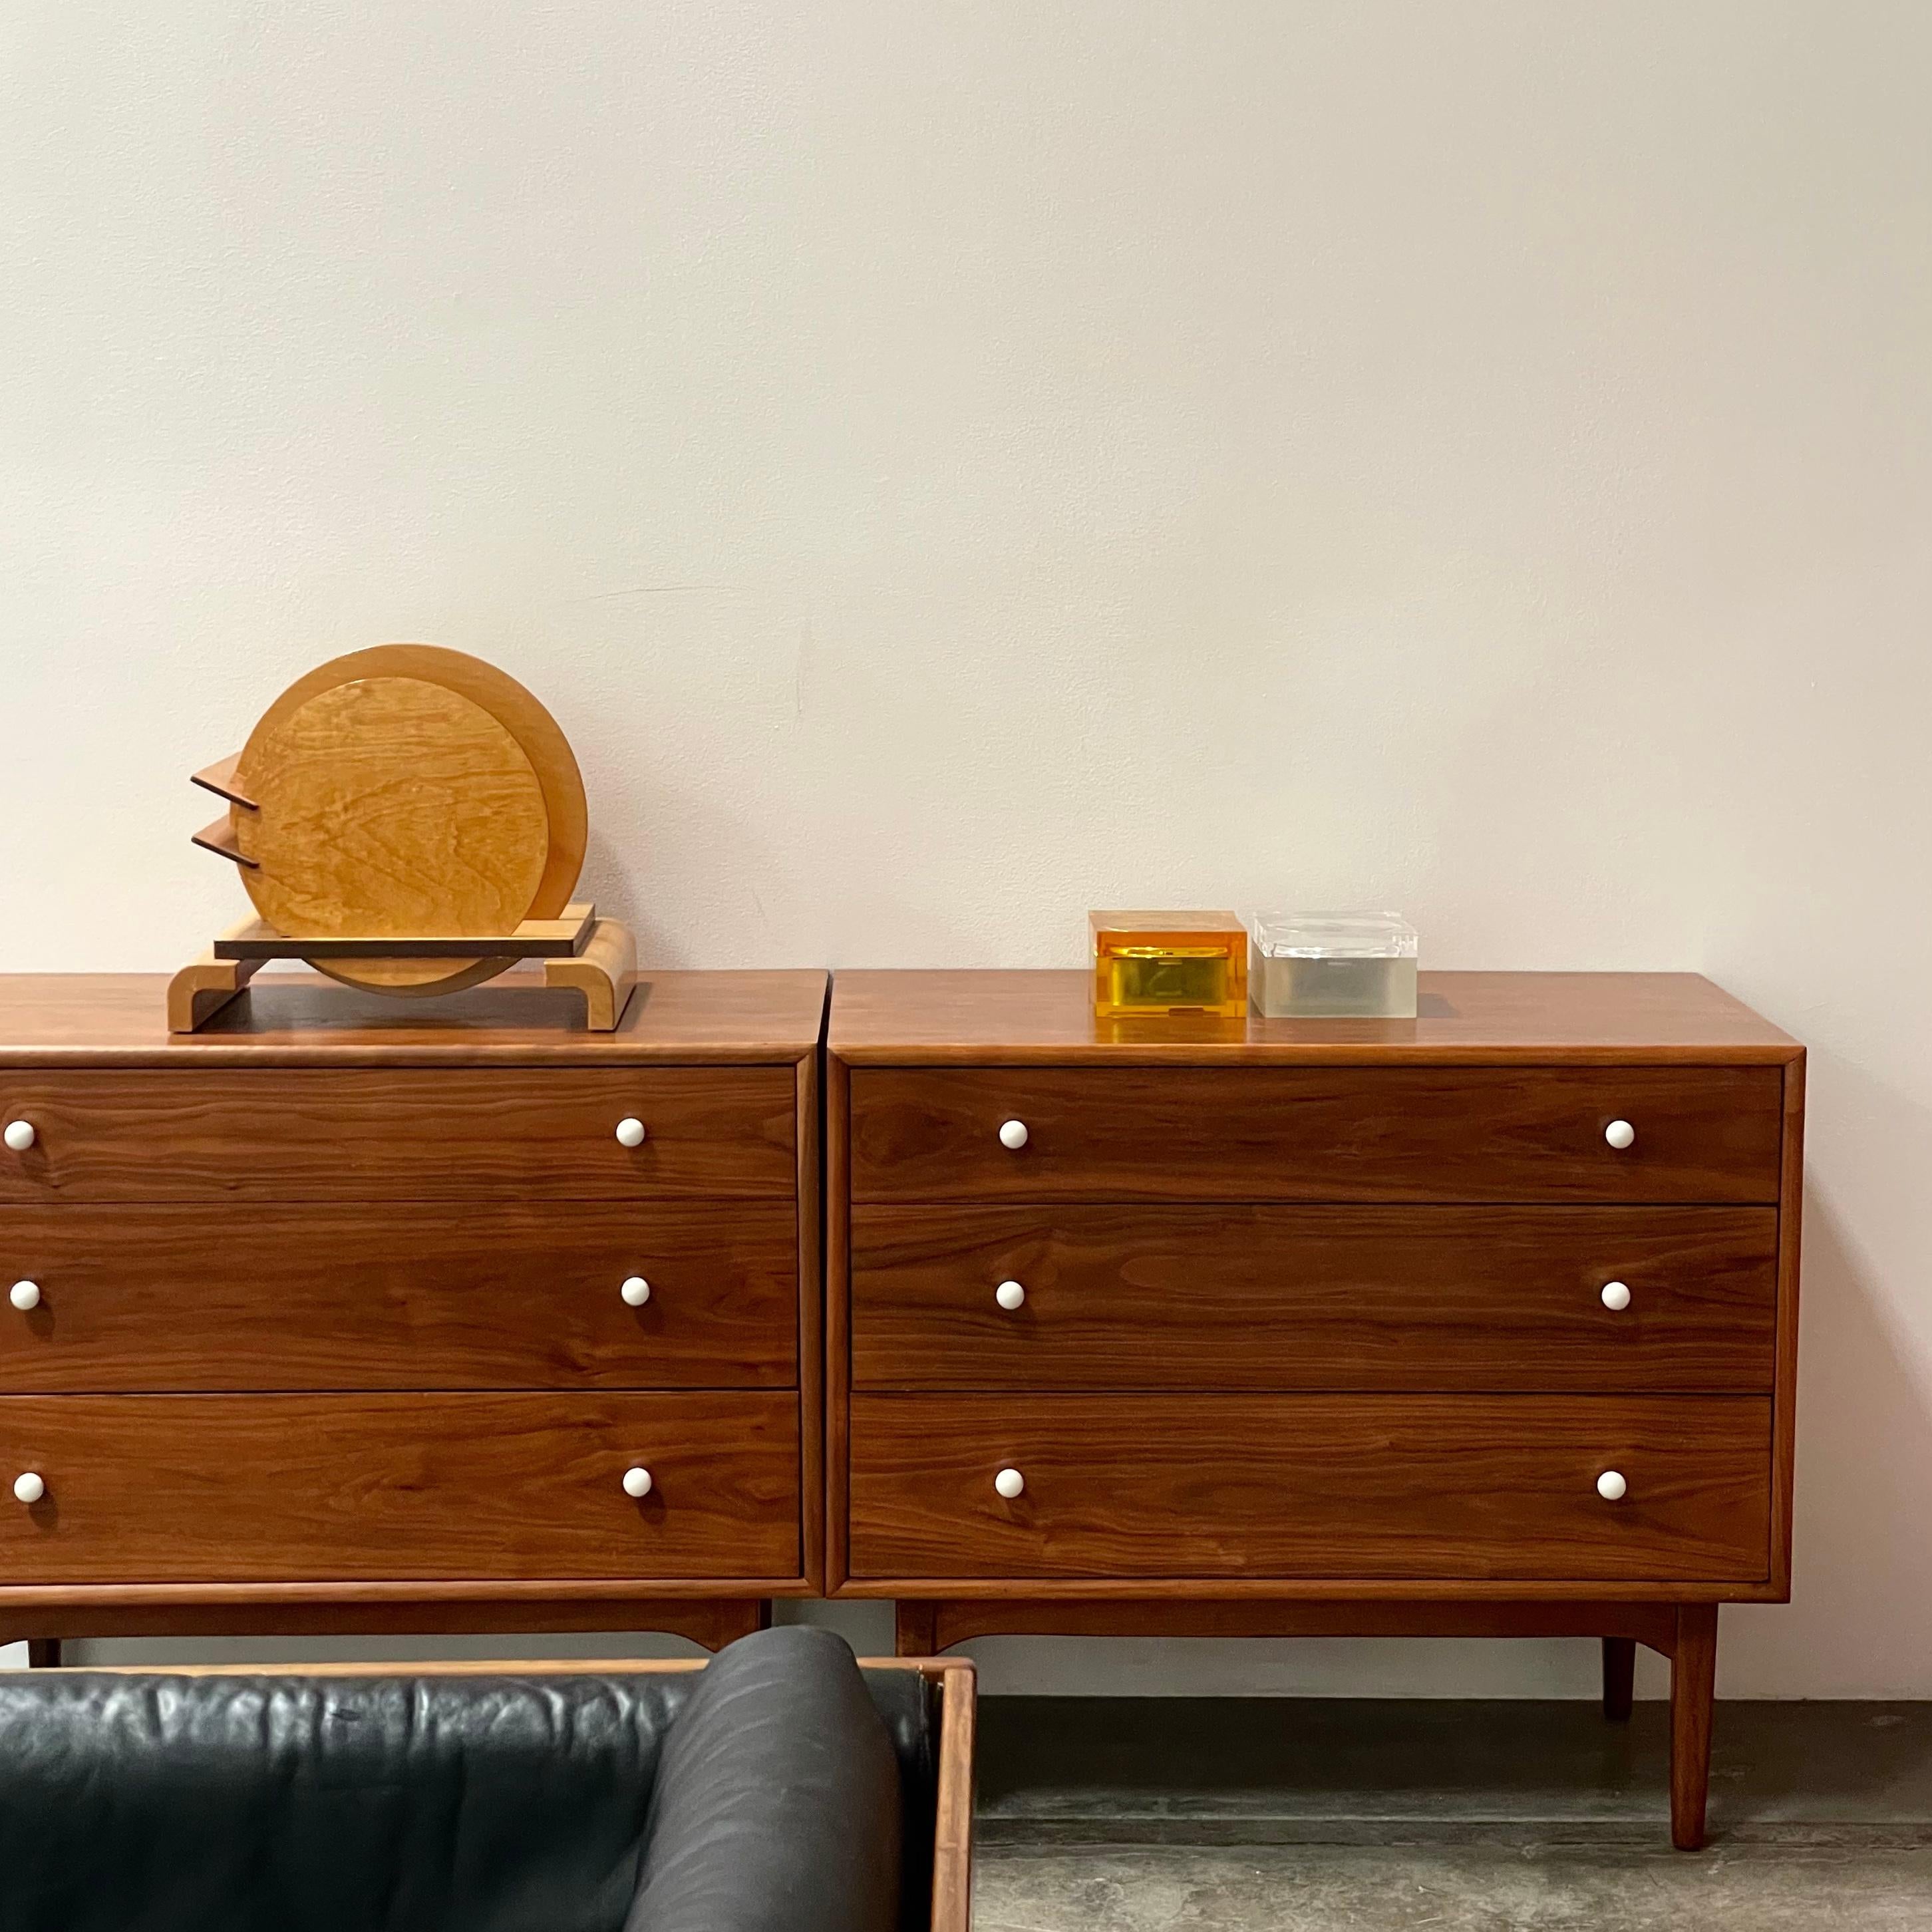 Mid-20th Century Dresser by Kipp Stewart Jr. for Drexel, 1960s. (One available)